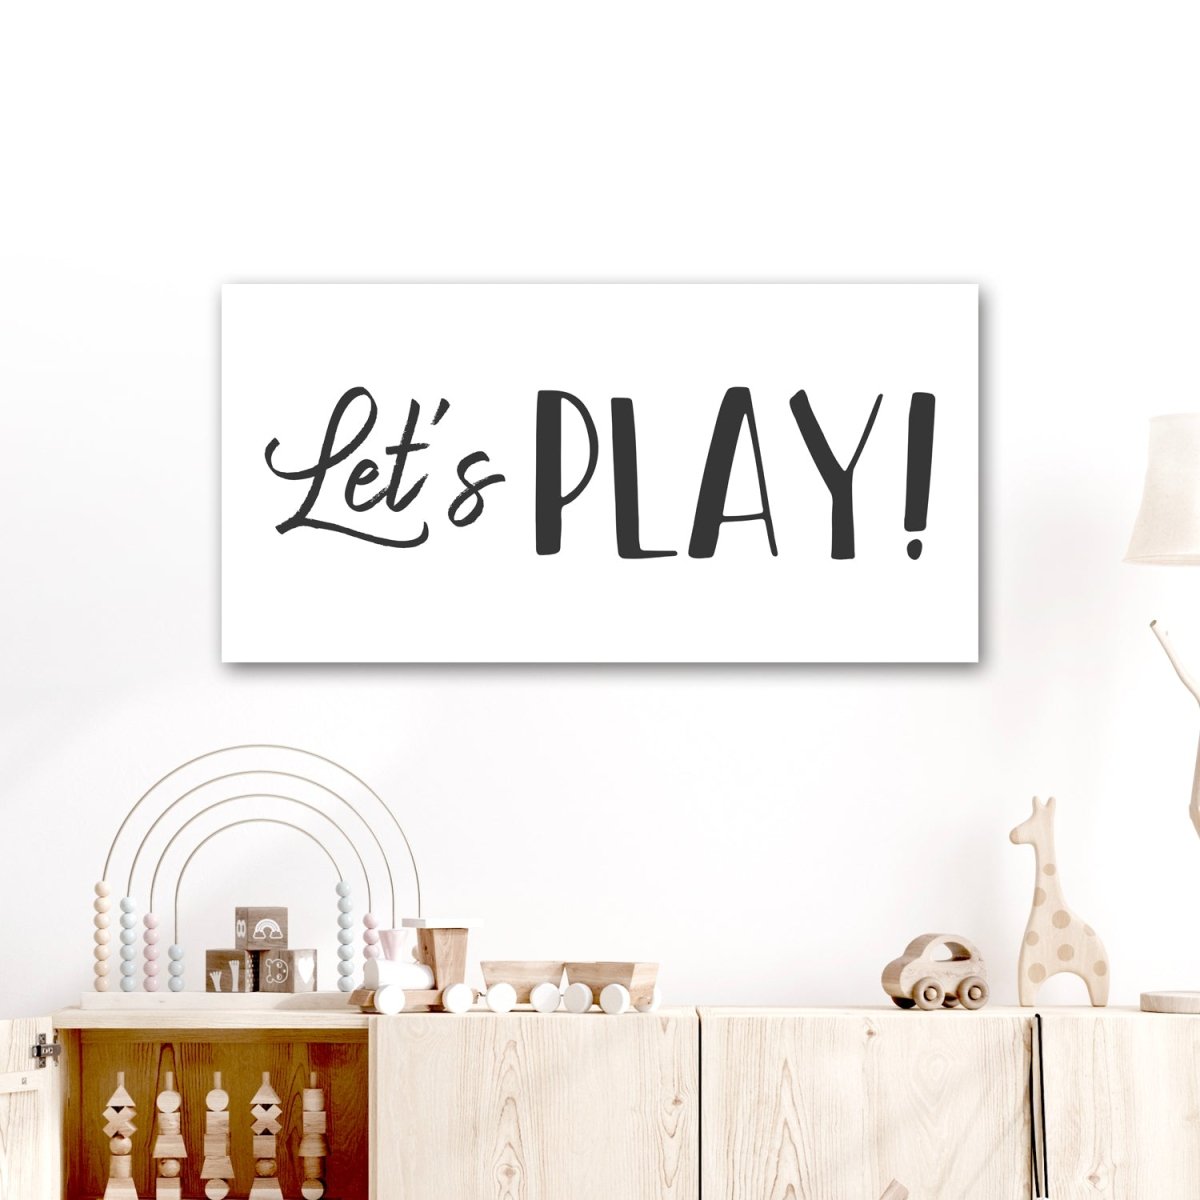 Let's Play Canvas Sign Hanging Above Play Table - Pretty Perfect Studio